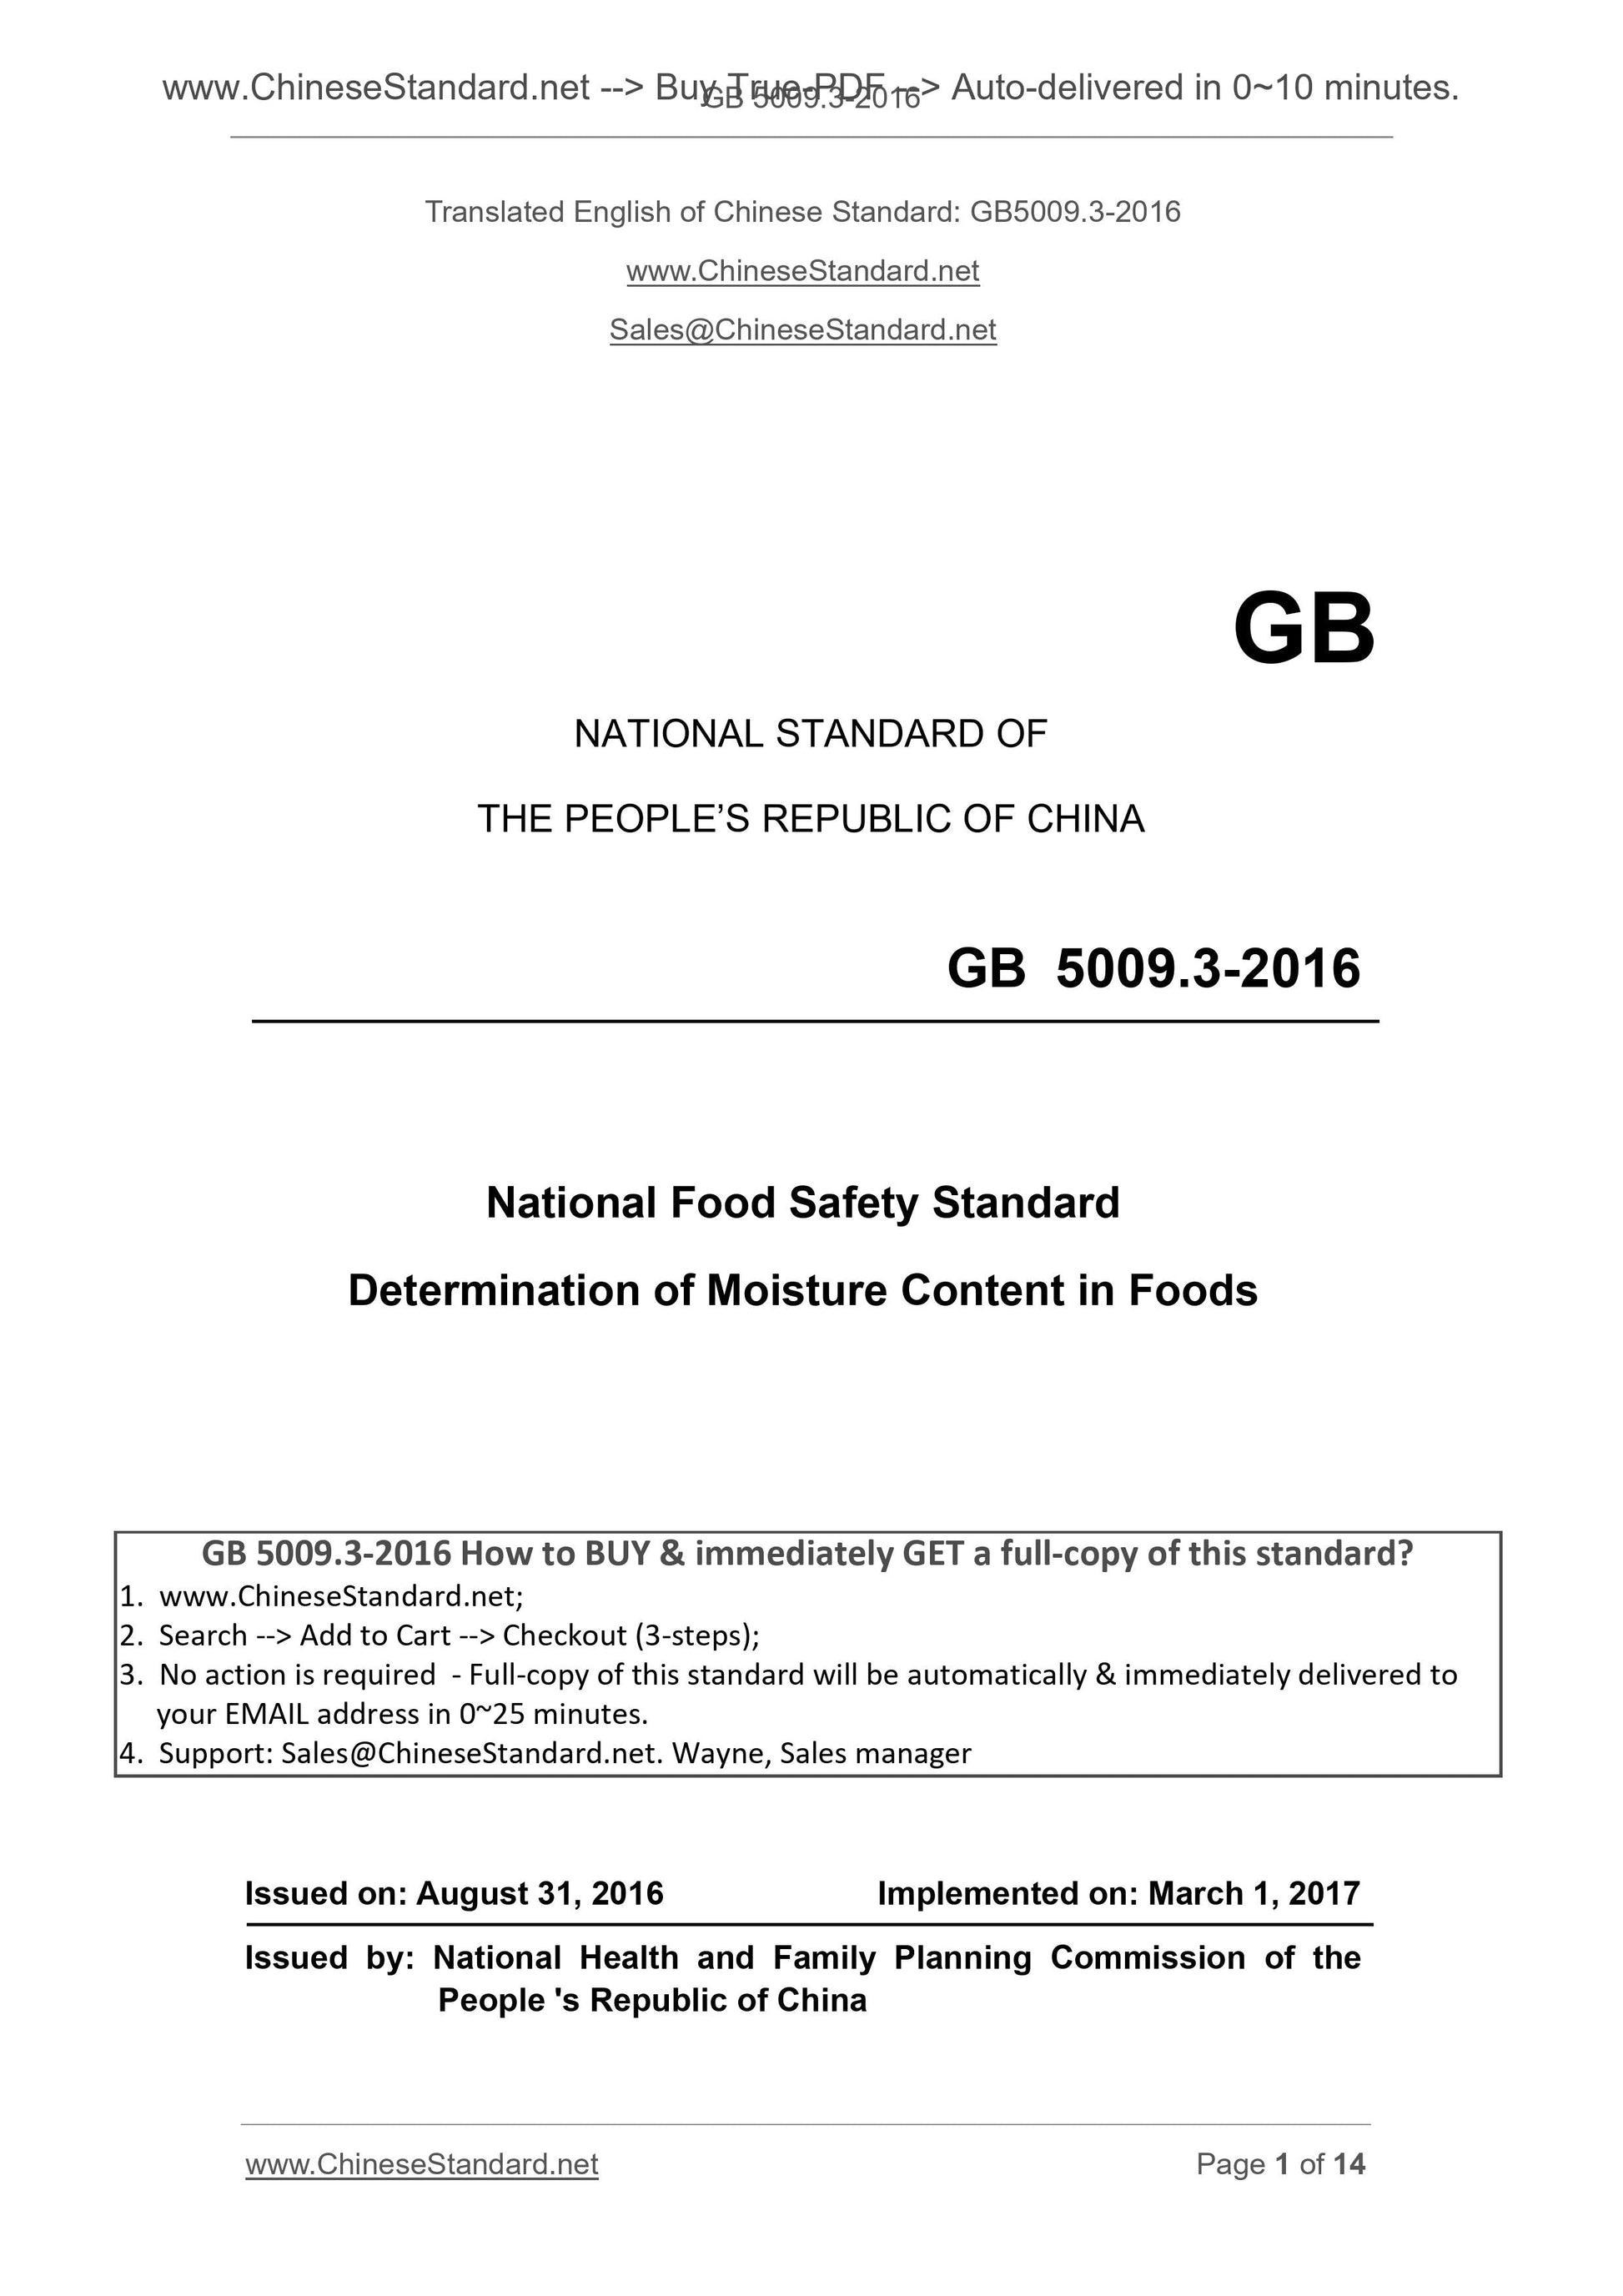 GB 5009.3-2016 Page 1